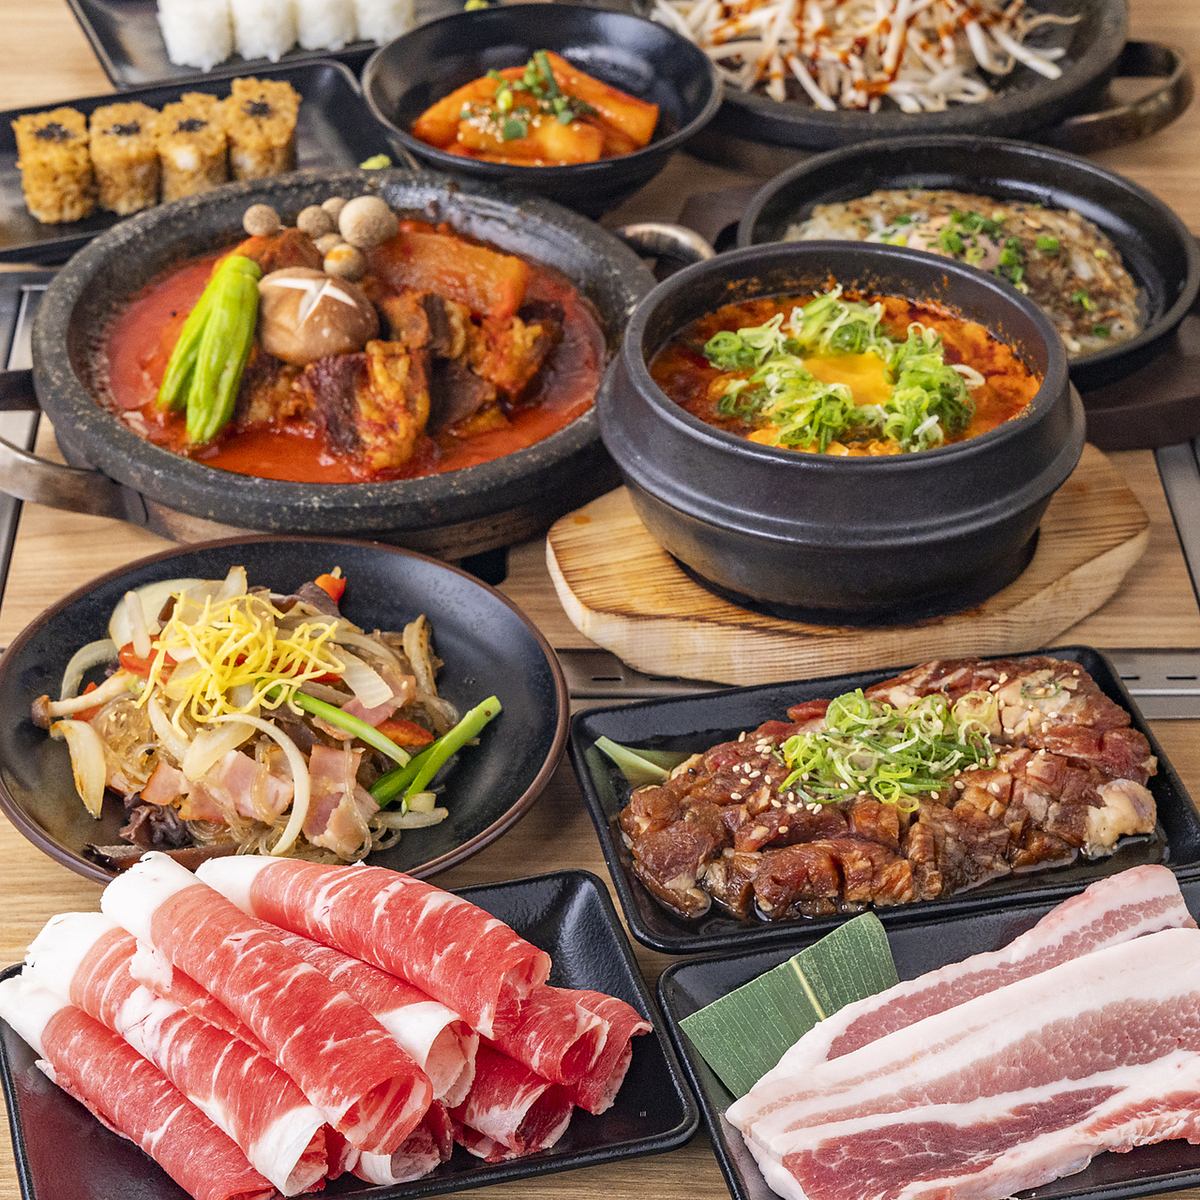 A 2-minute walk from Namba Station! A restaurant where you can enjoy Korea's very popular chadolbagi and samgyeopsal!